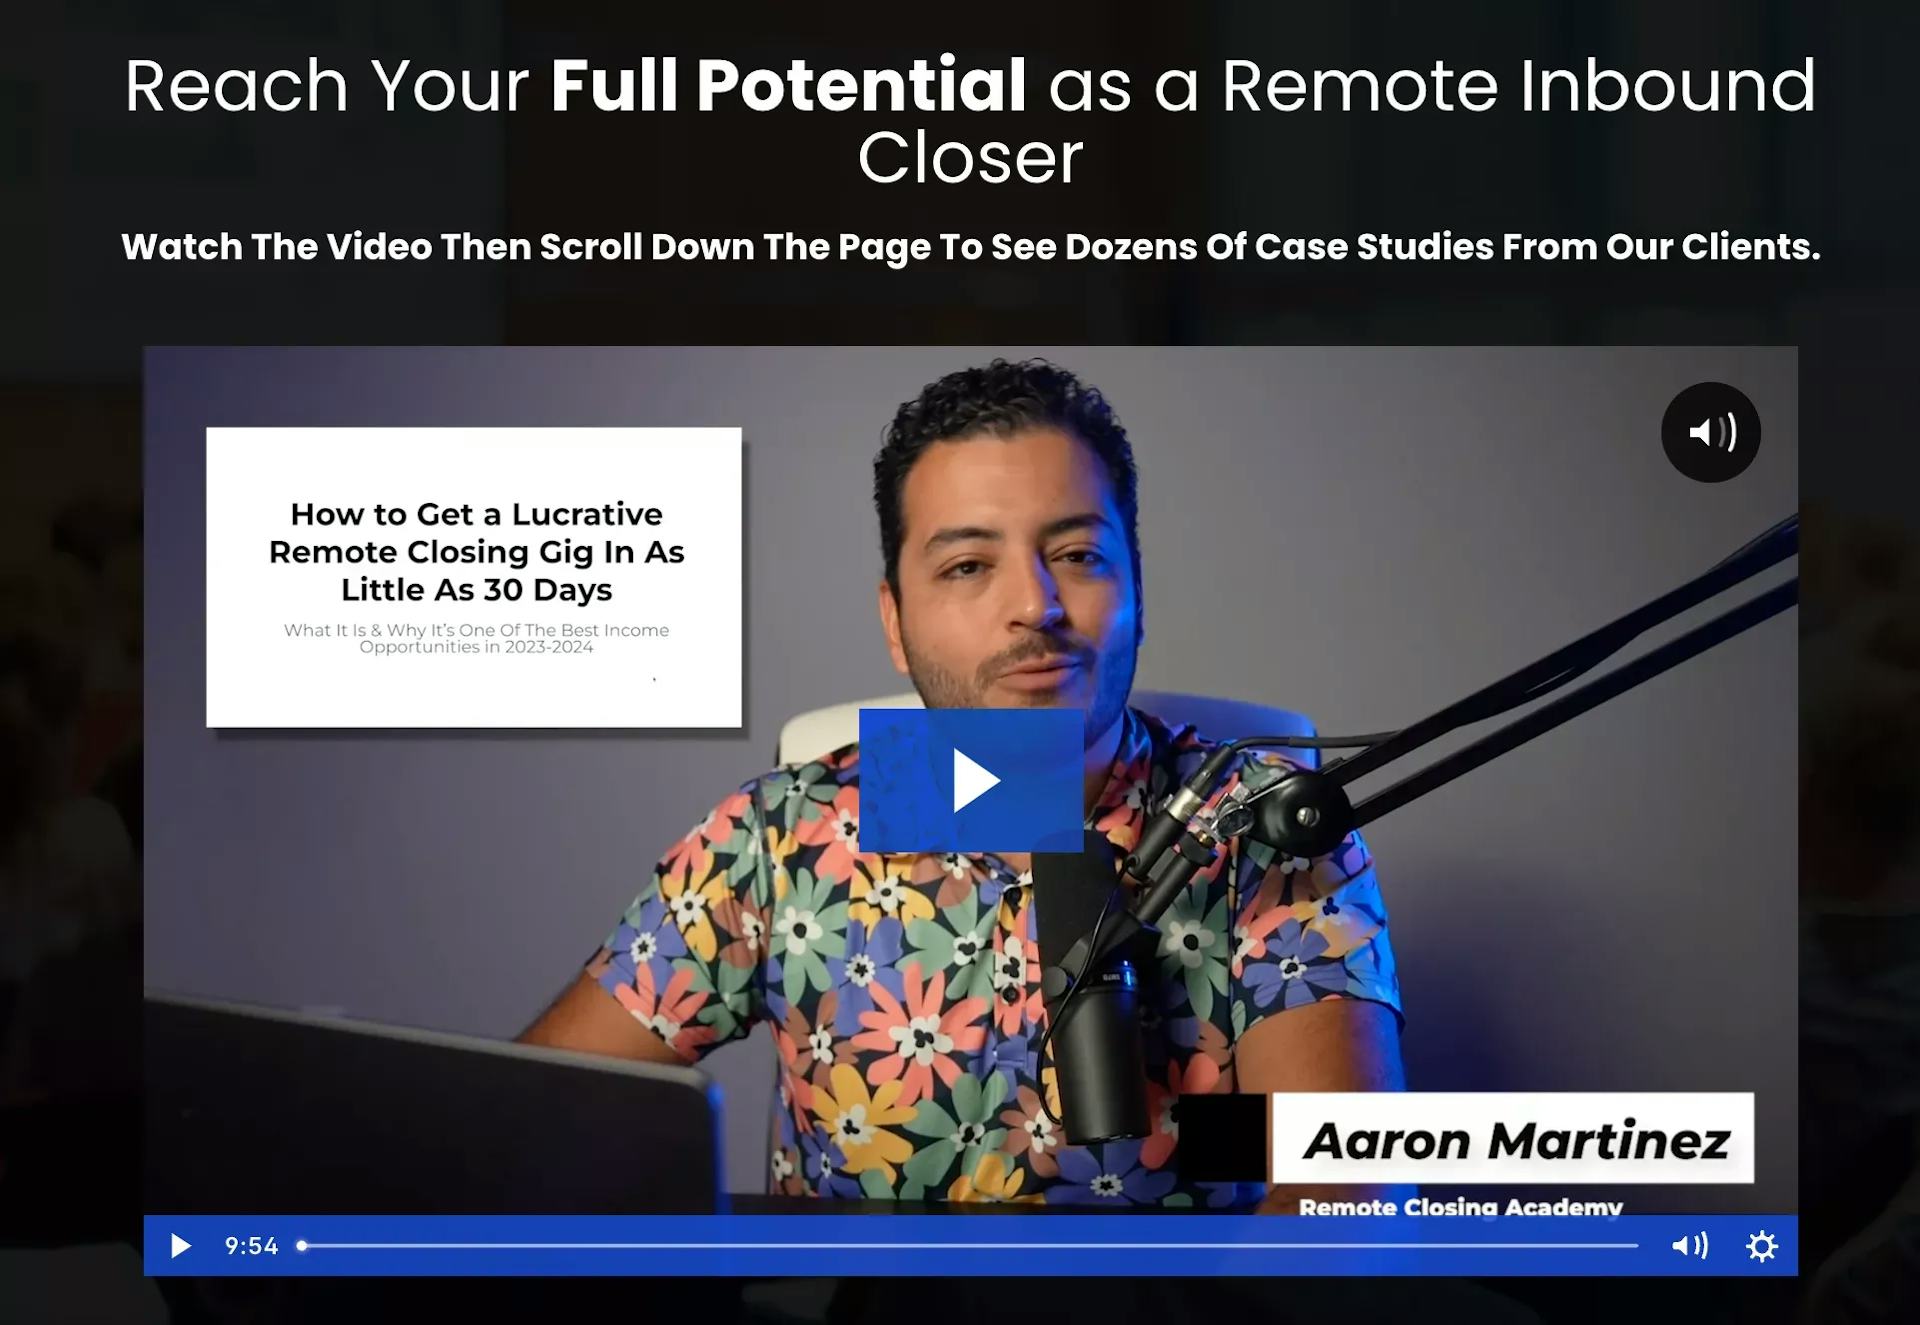 Aaron Martinez Review (Updated [year]): What Is His Job In Remote Closing Academy?